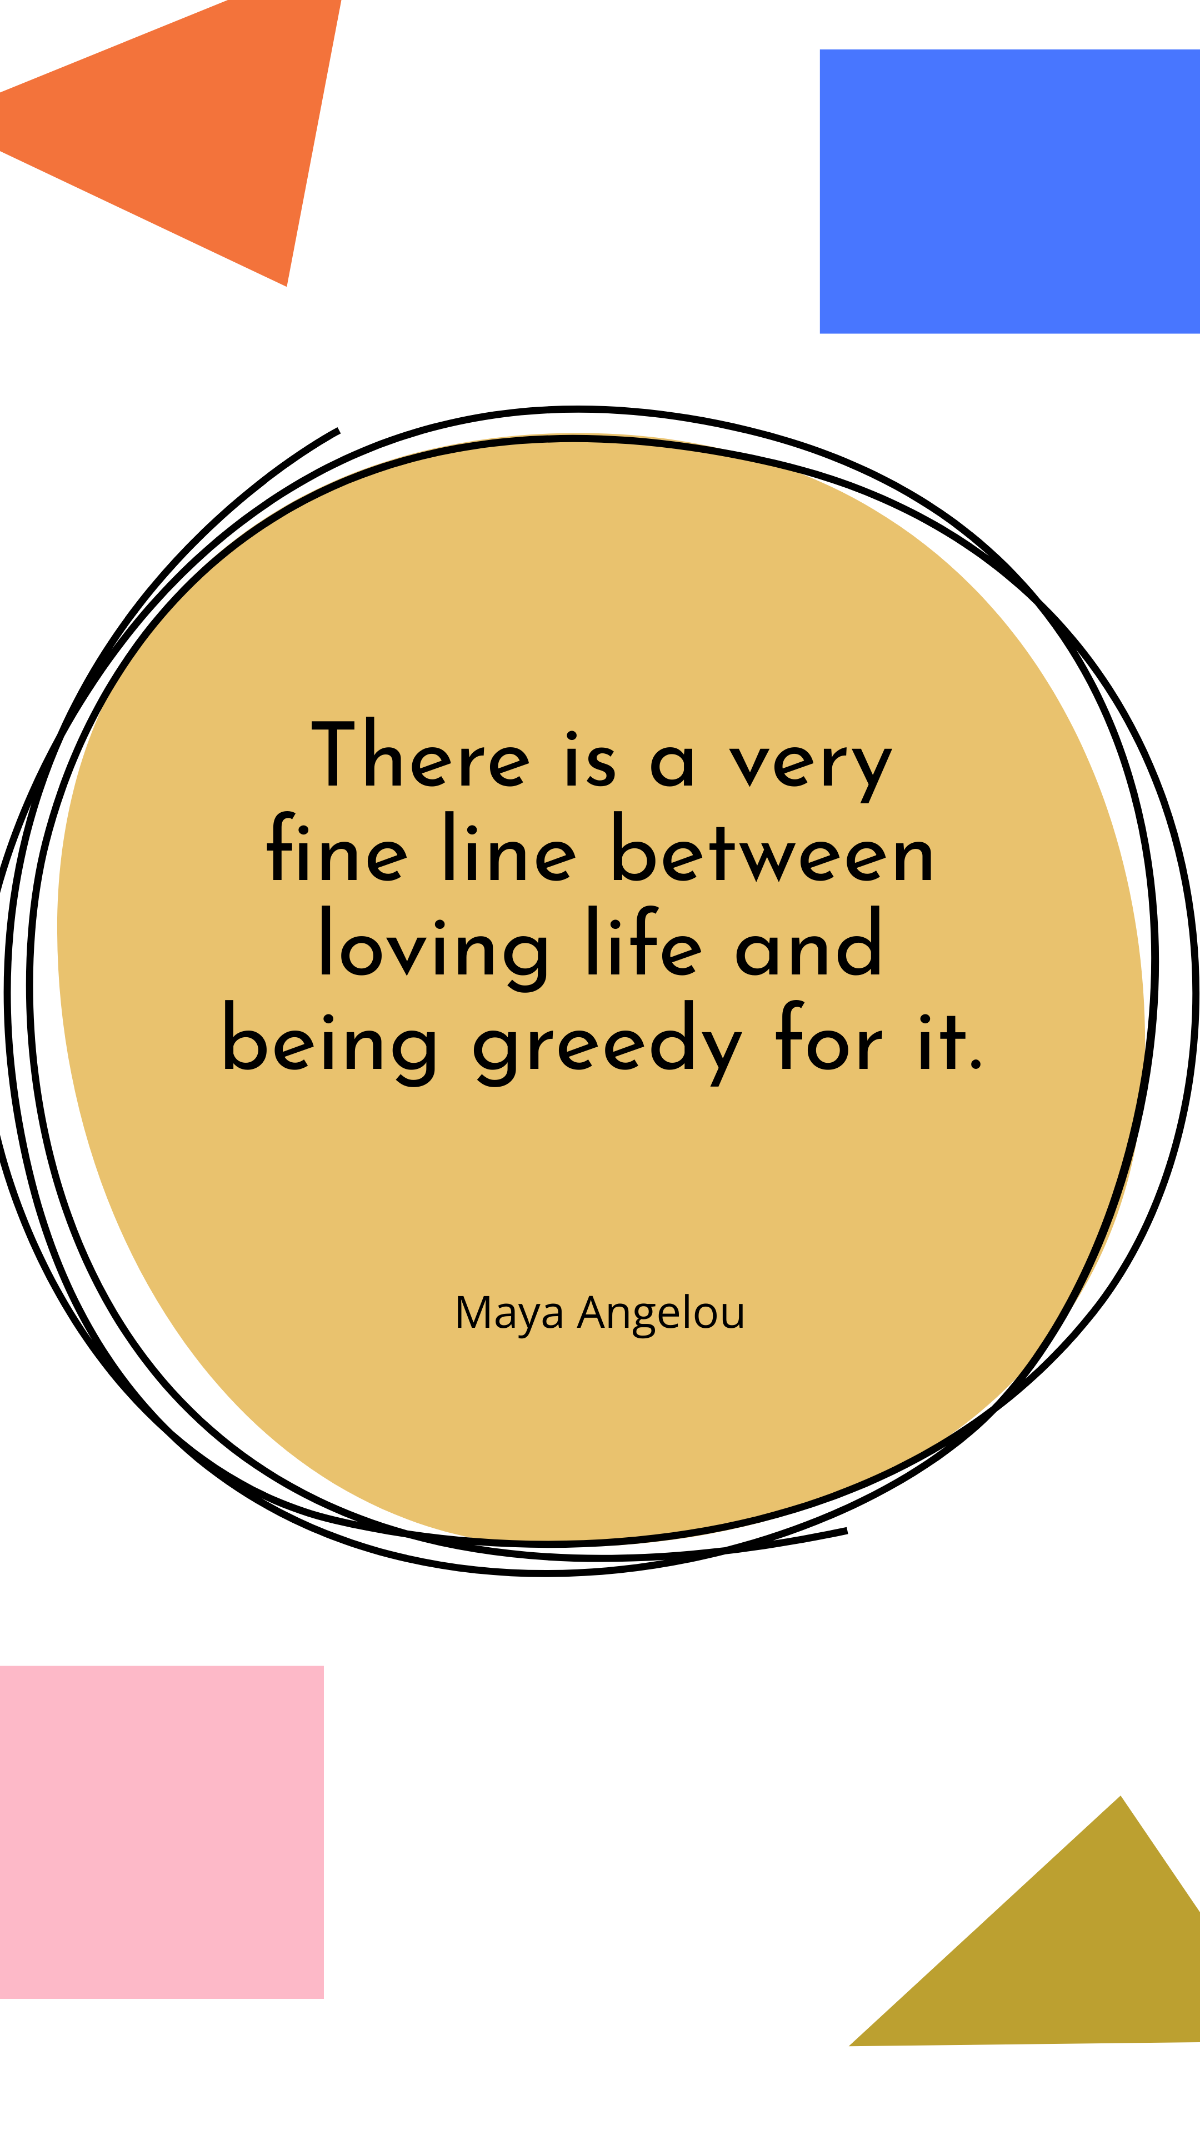 Maya Angelou - There is a very fine line between loving life and being greedy for it. Template